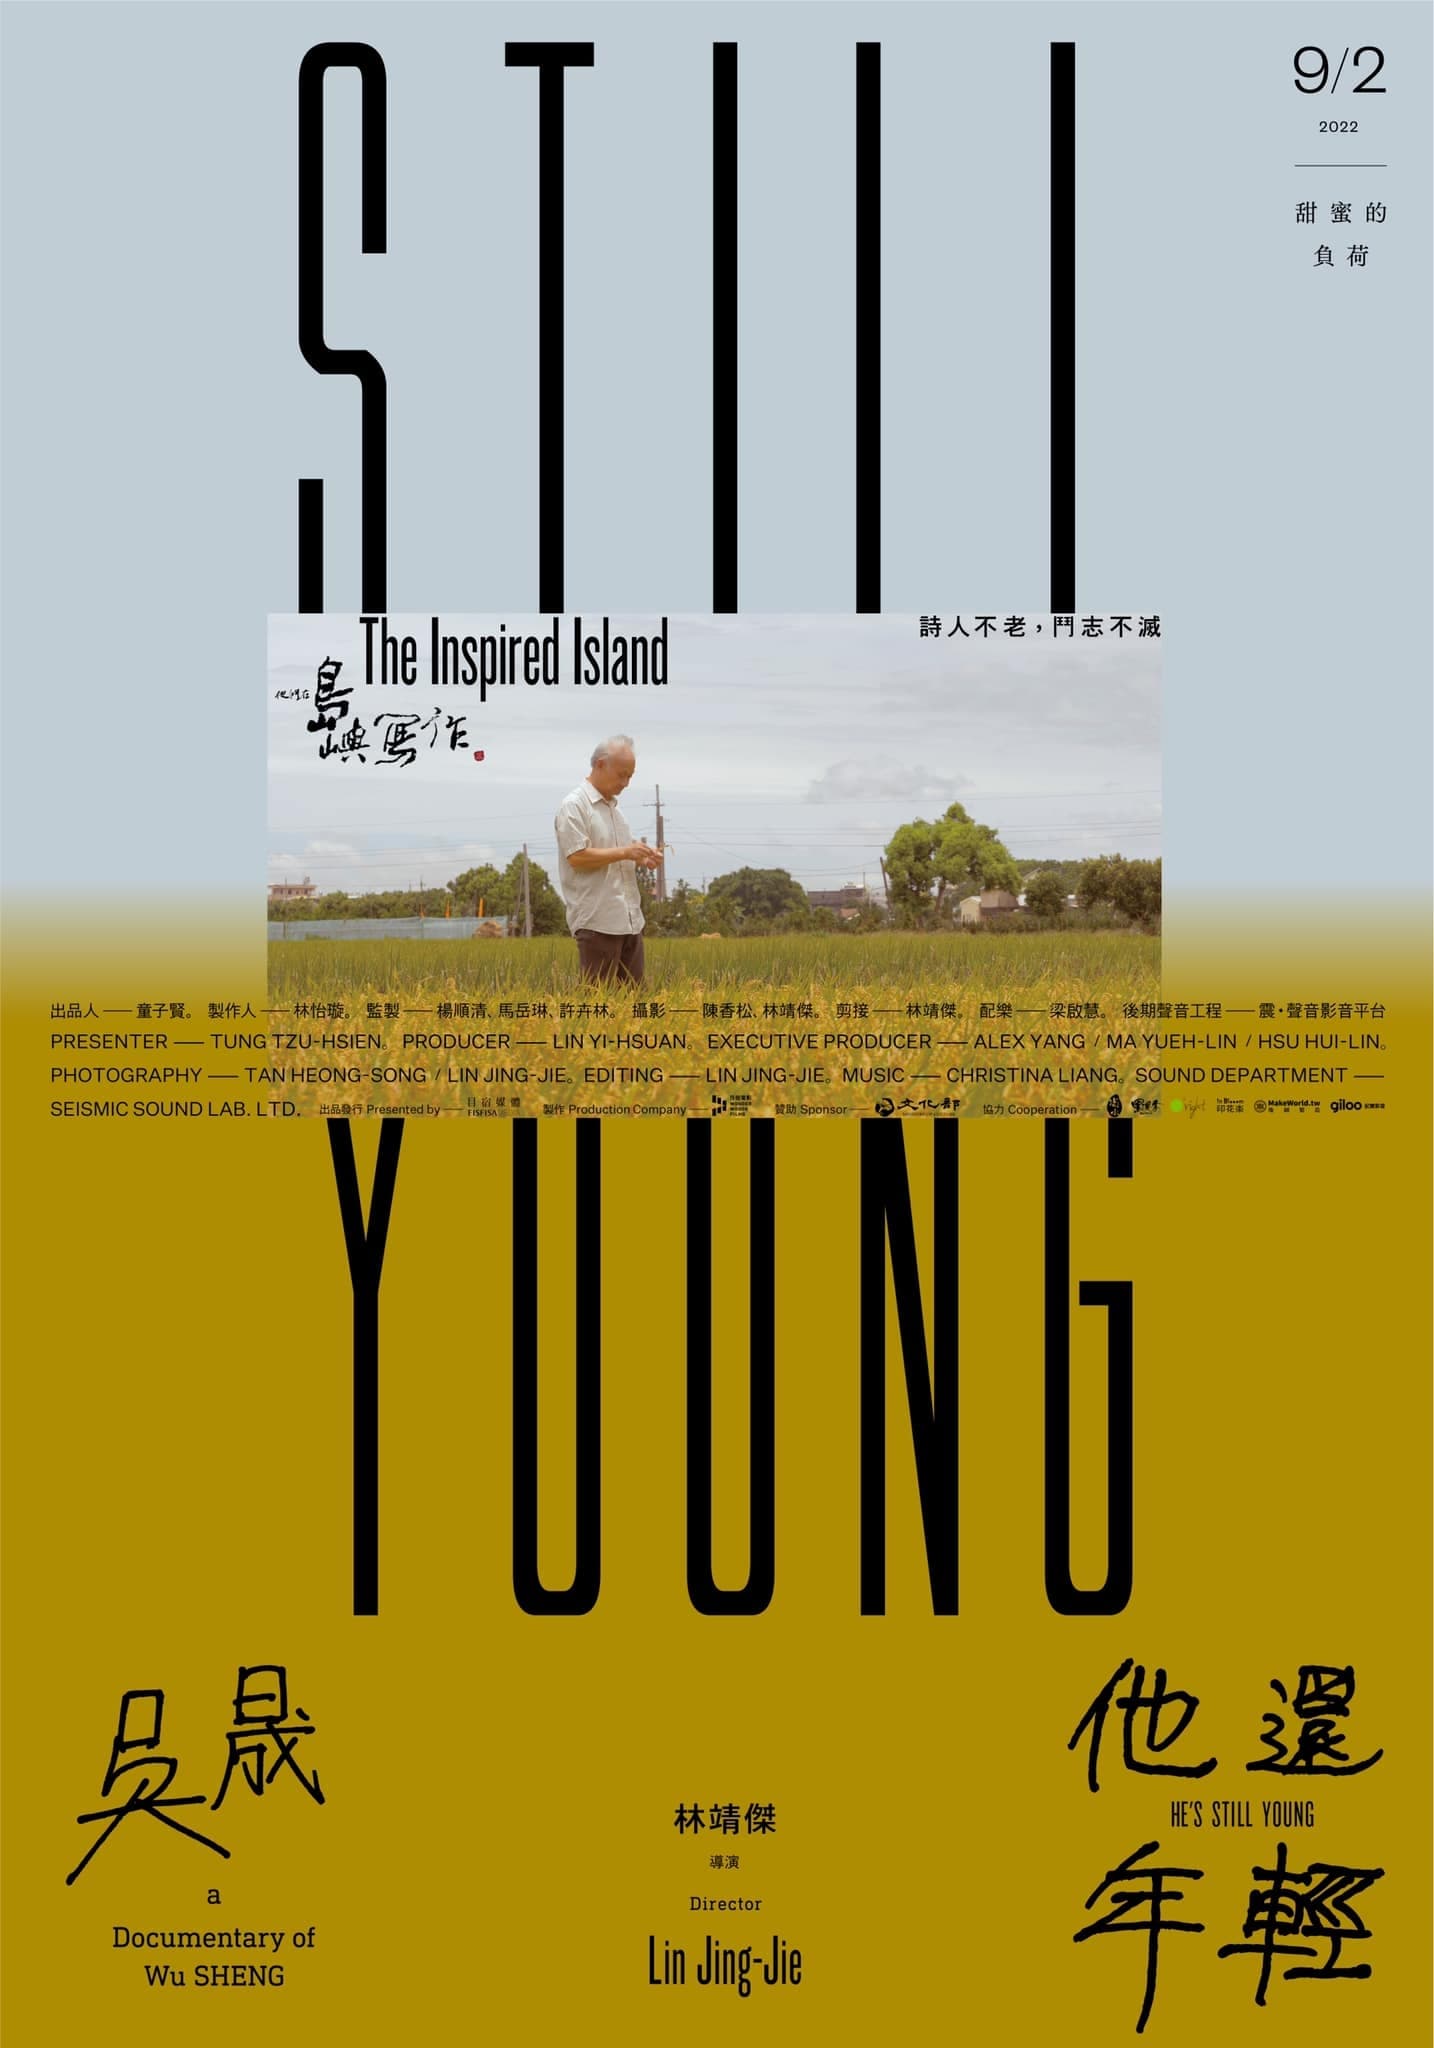 The Inspired Island: Still Young